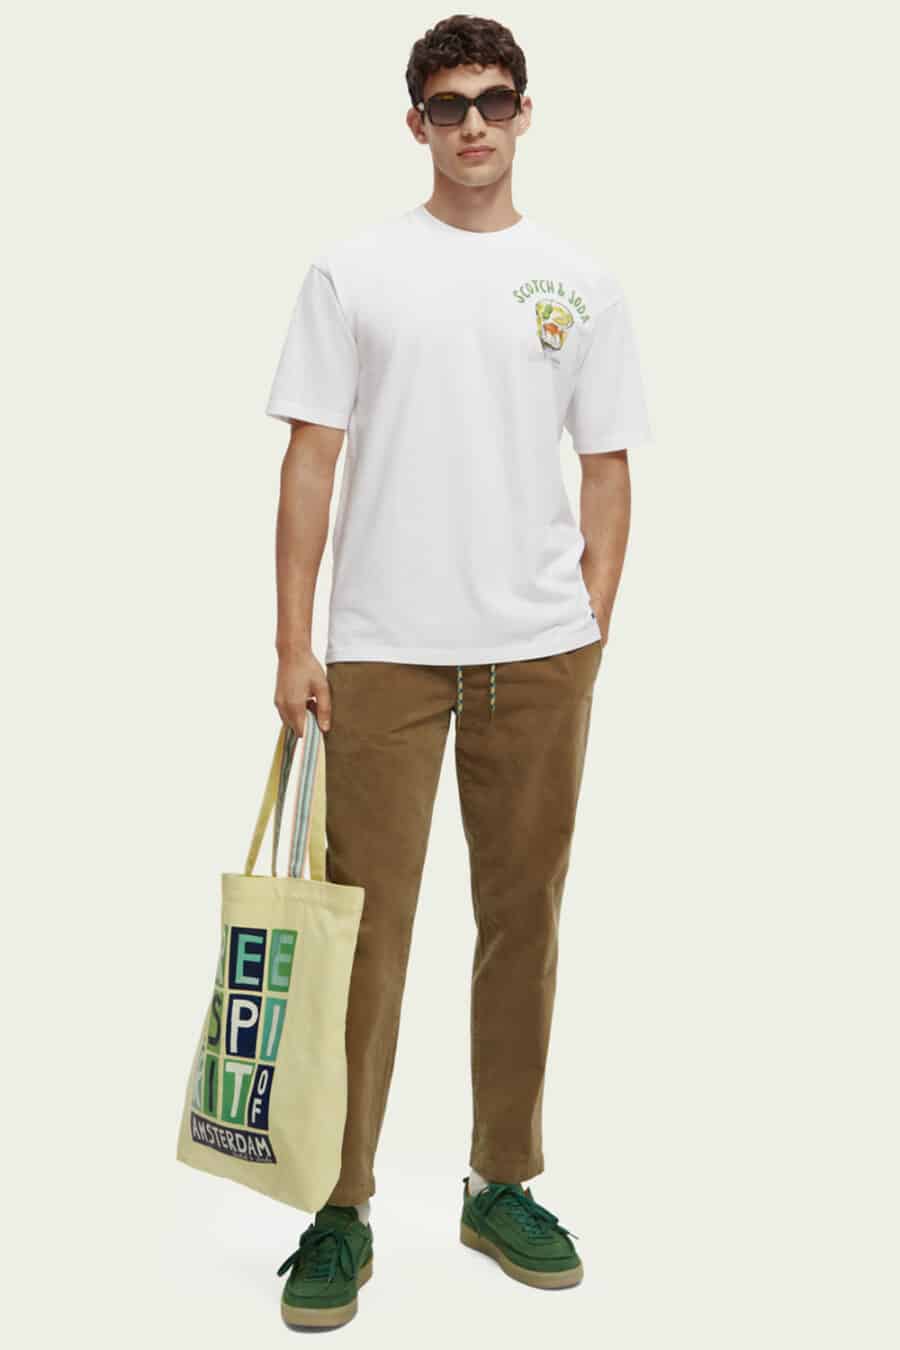 Men's brown pants, white graphic T-shirt, green sneakers and tote bag outfit